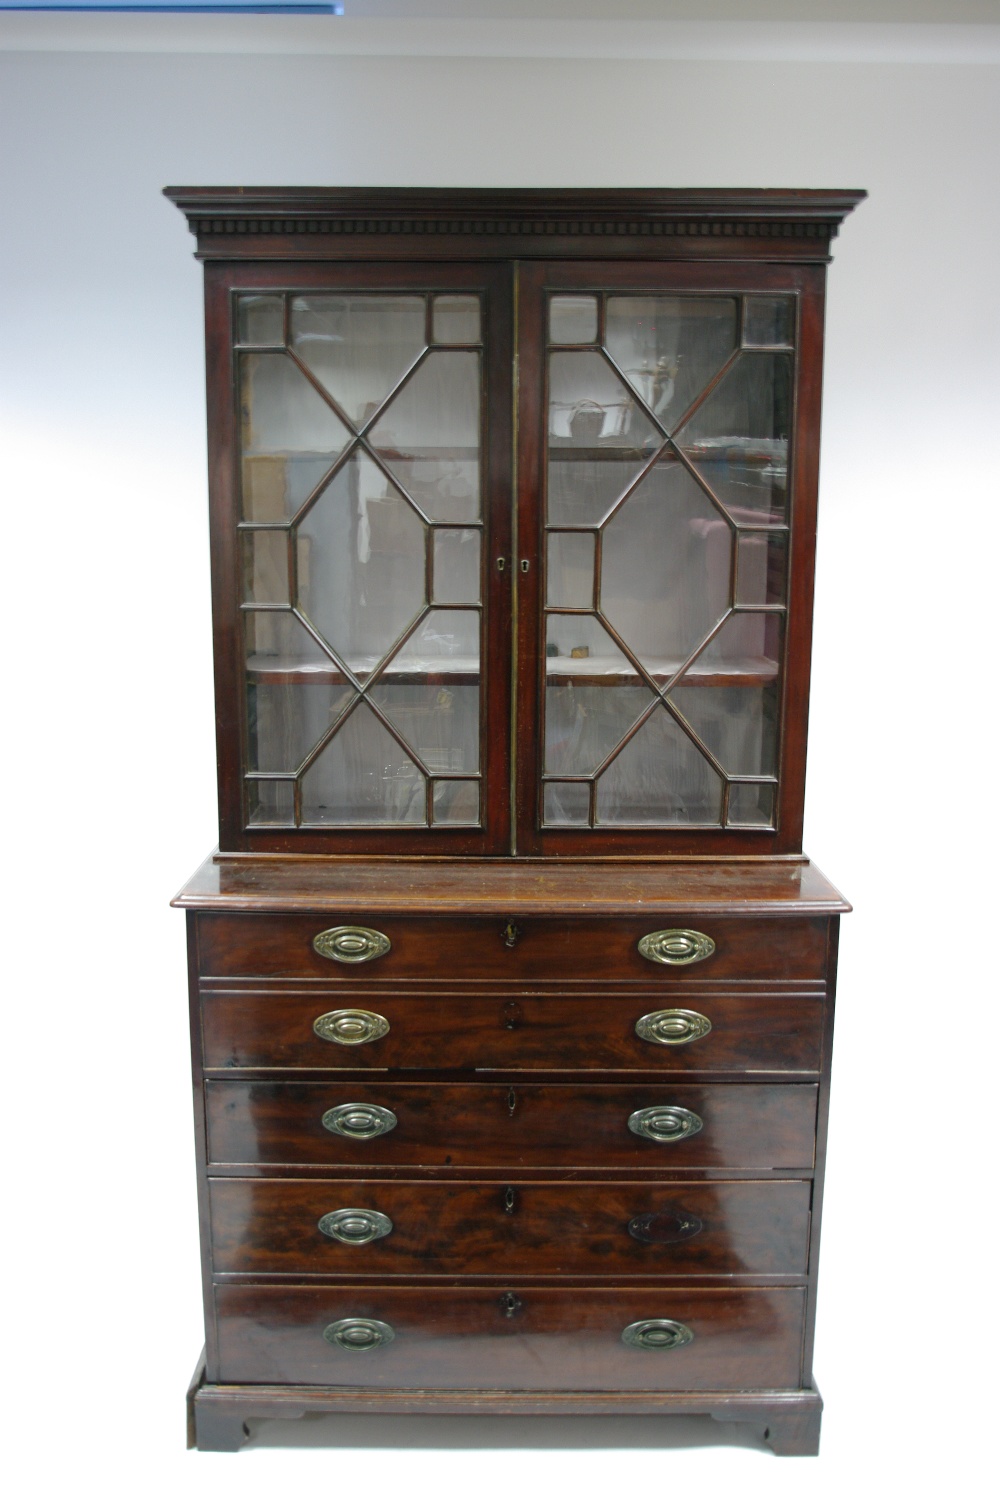 A late 18th century mahogany secretaire bookcase enclosed by a pair of astragal glazed doors, the